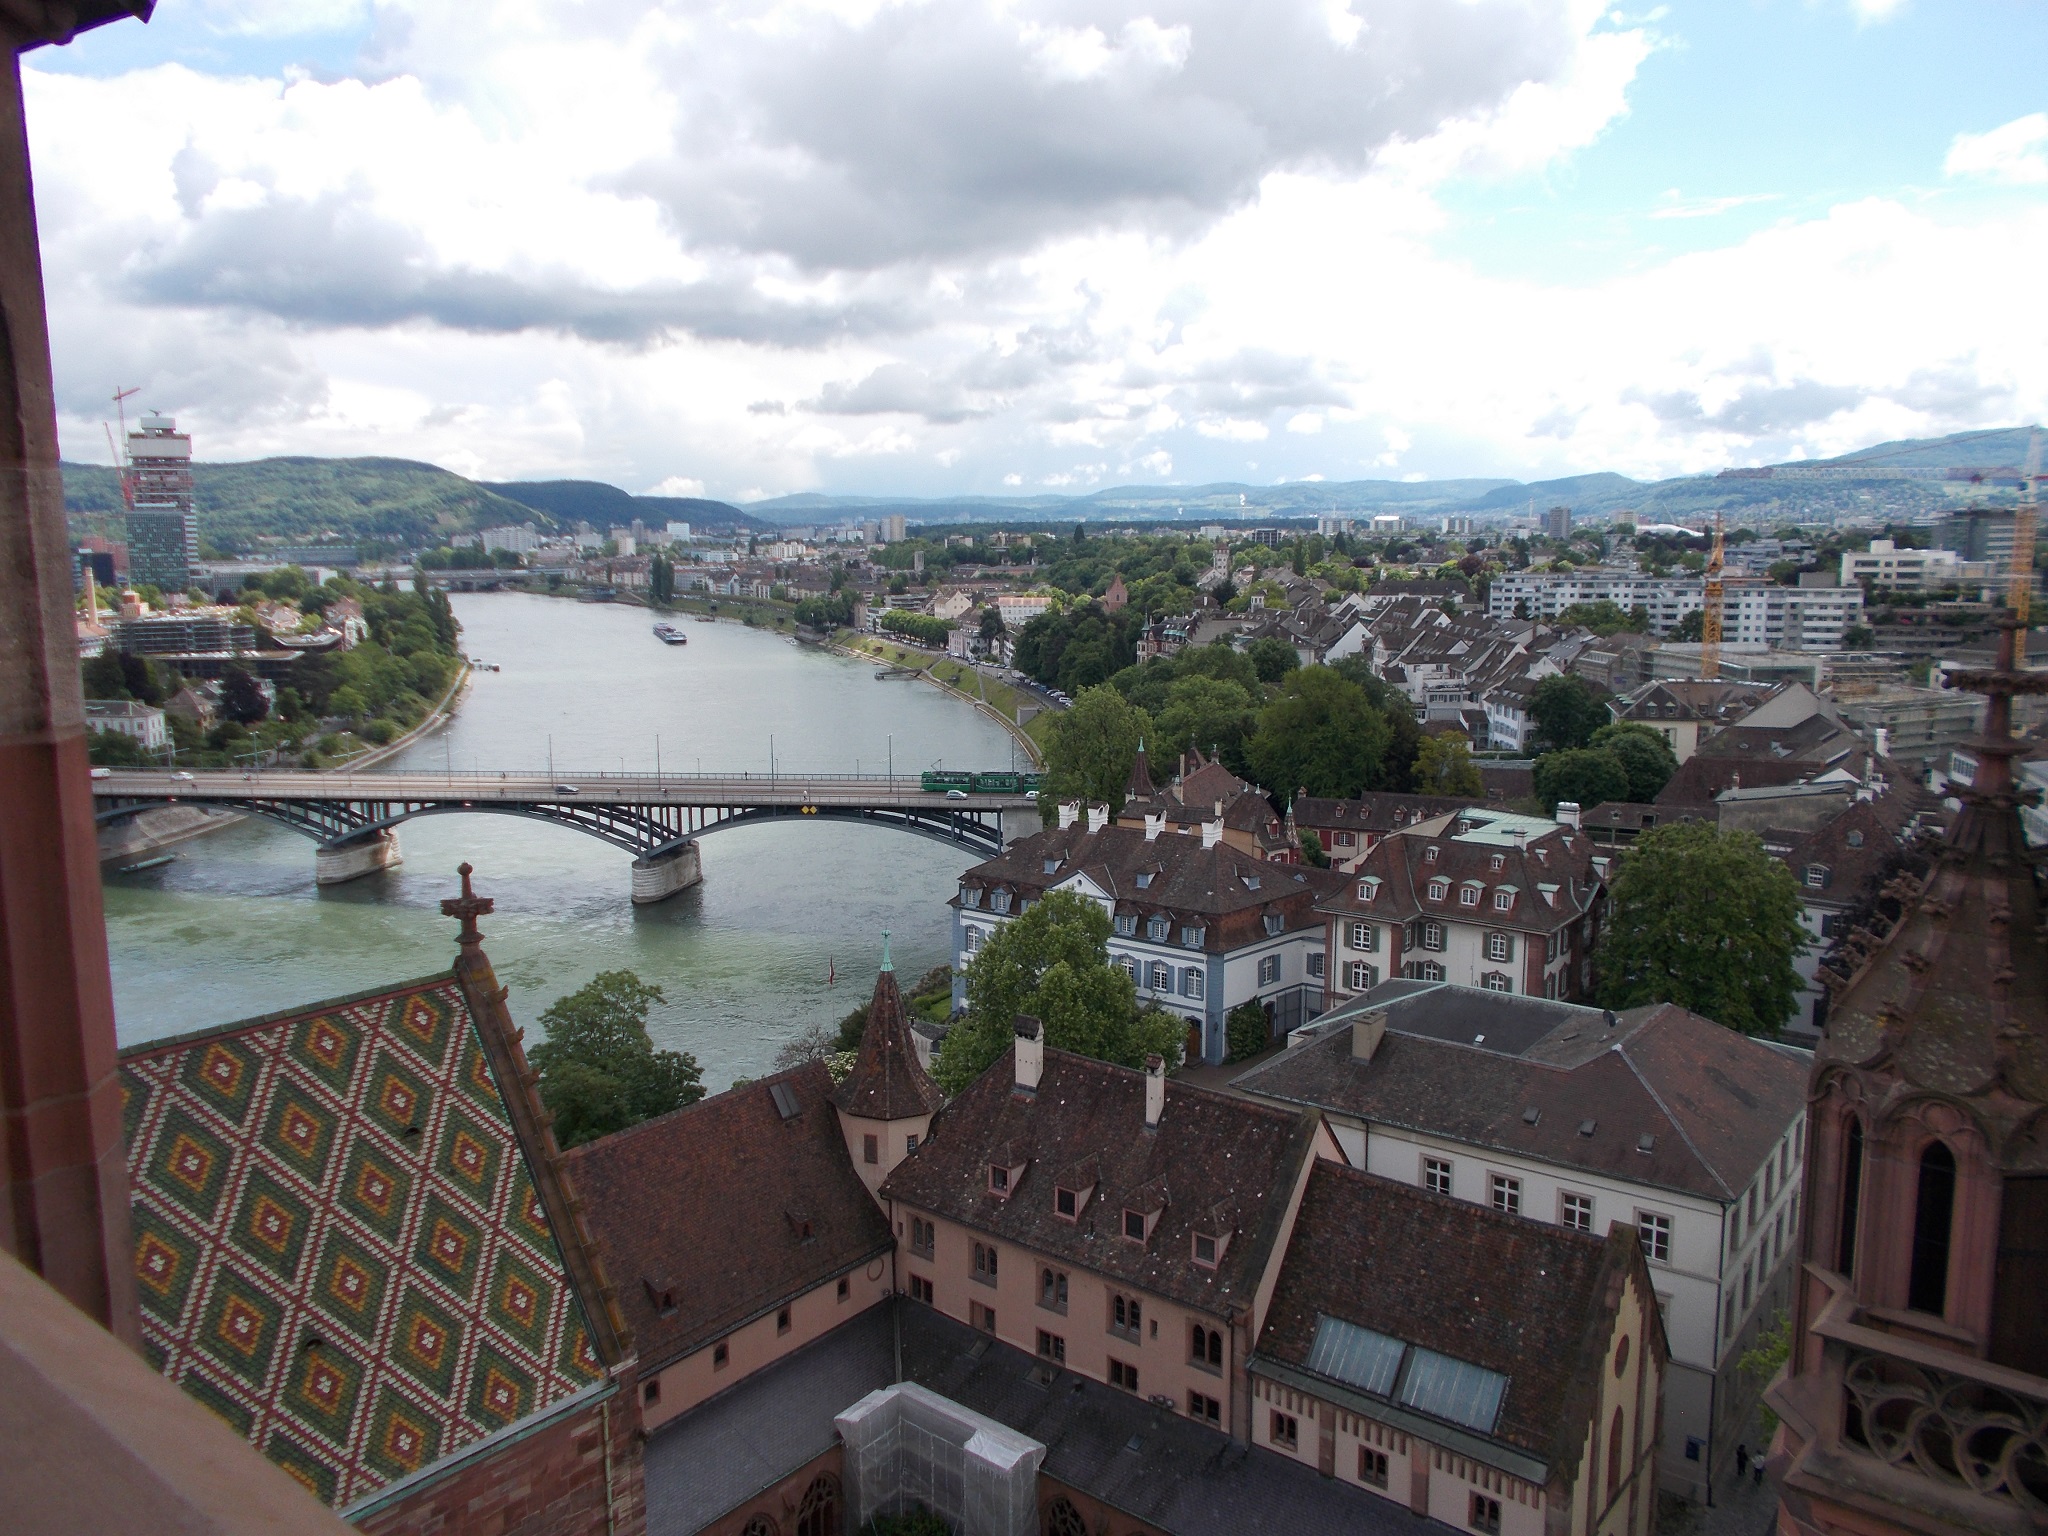 A large river running through Basel, Switzerland, a spire of a cathedral visible in the foreground.